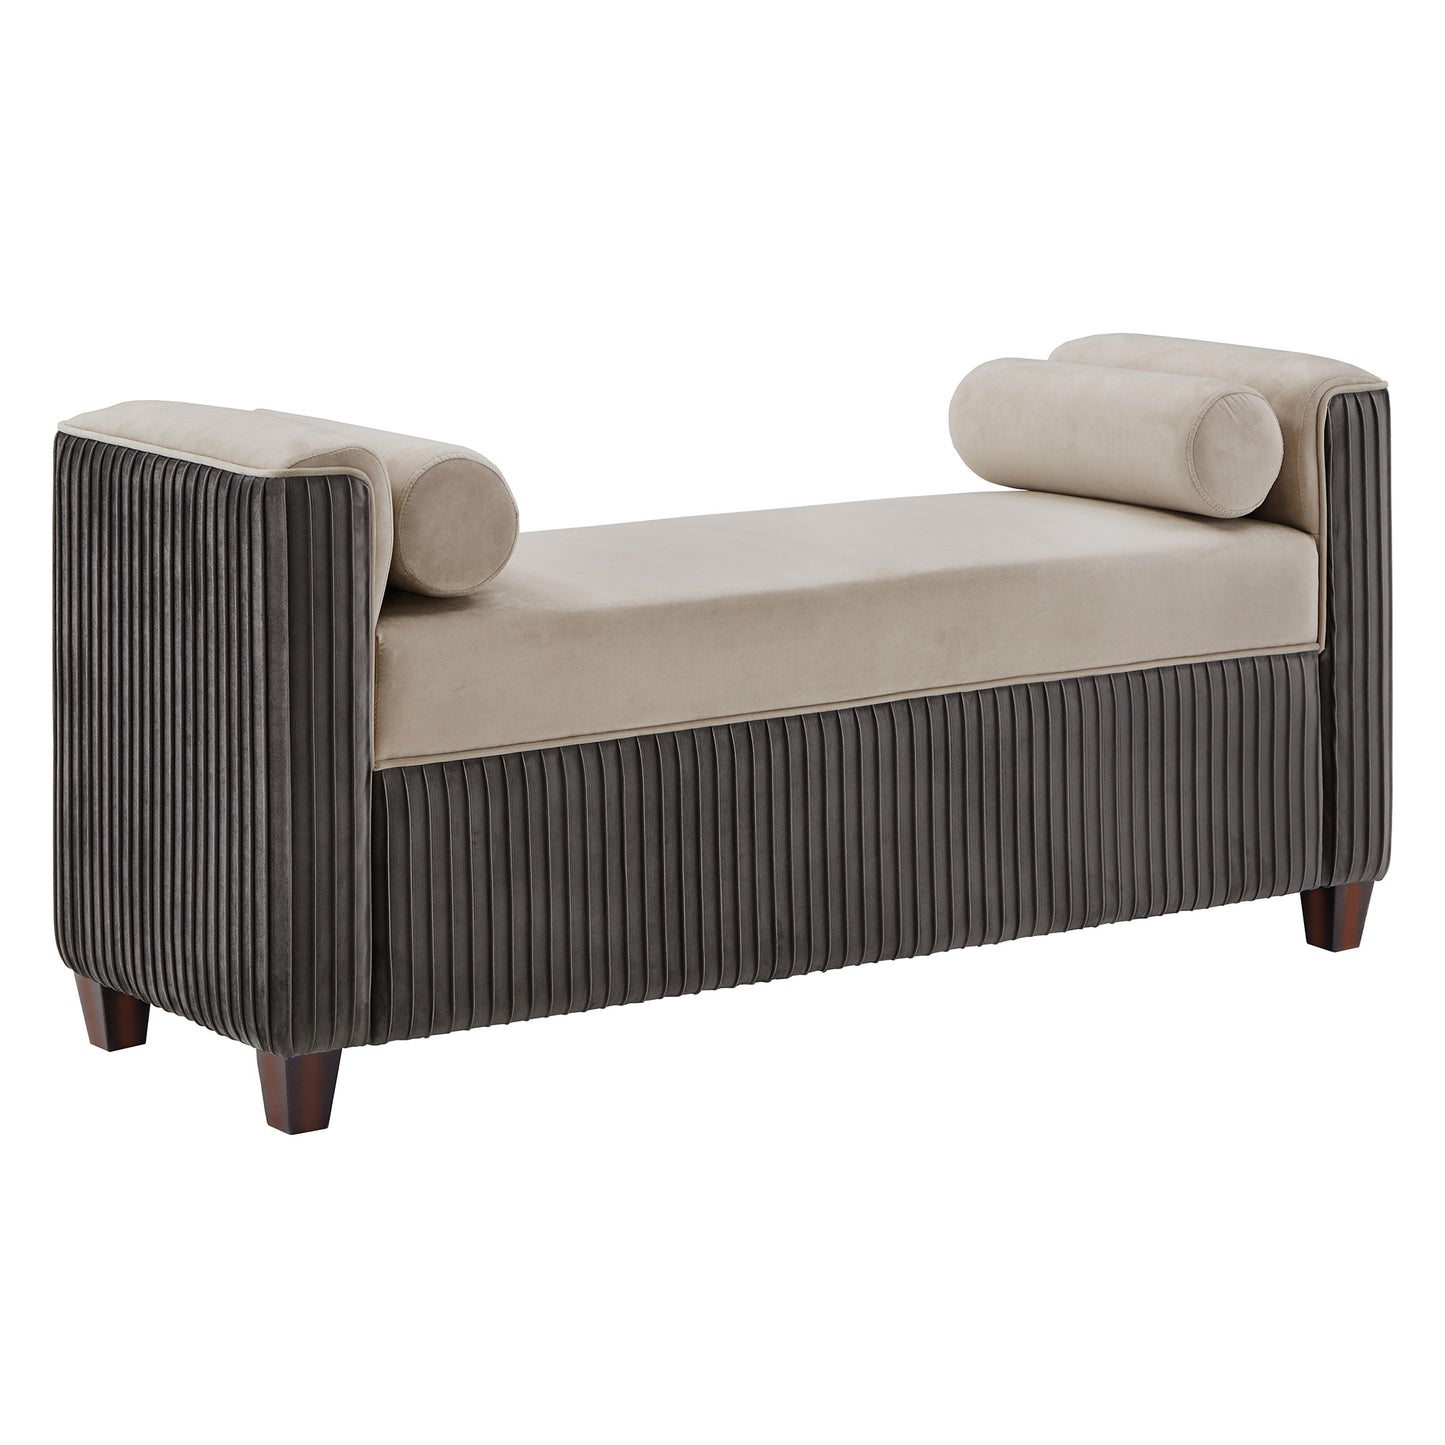 Chesterfield Pleated Velvet Bench with Pillows - Taupe and Grey